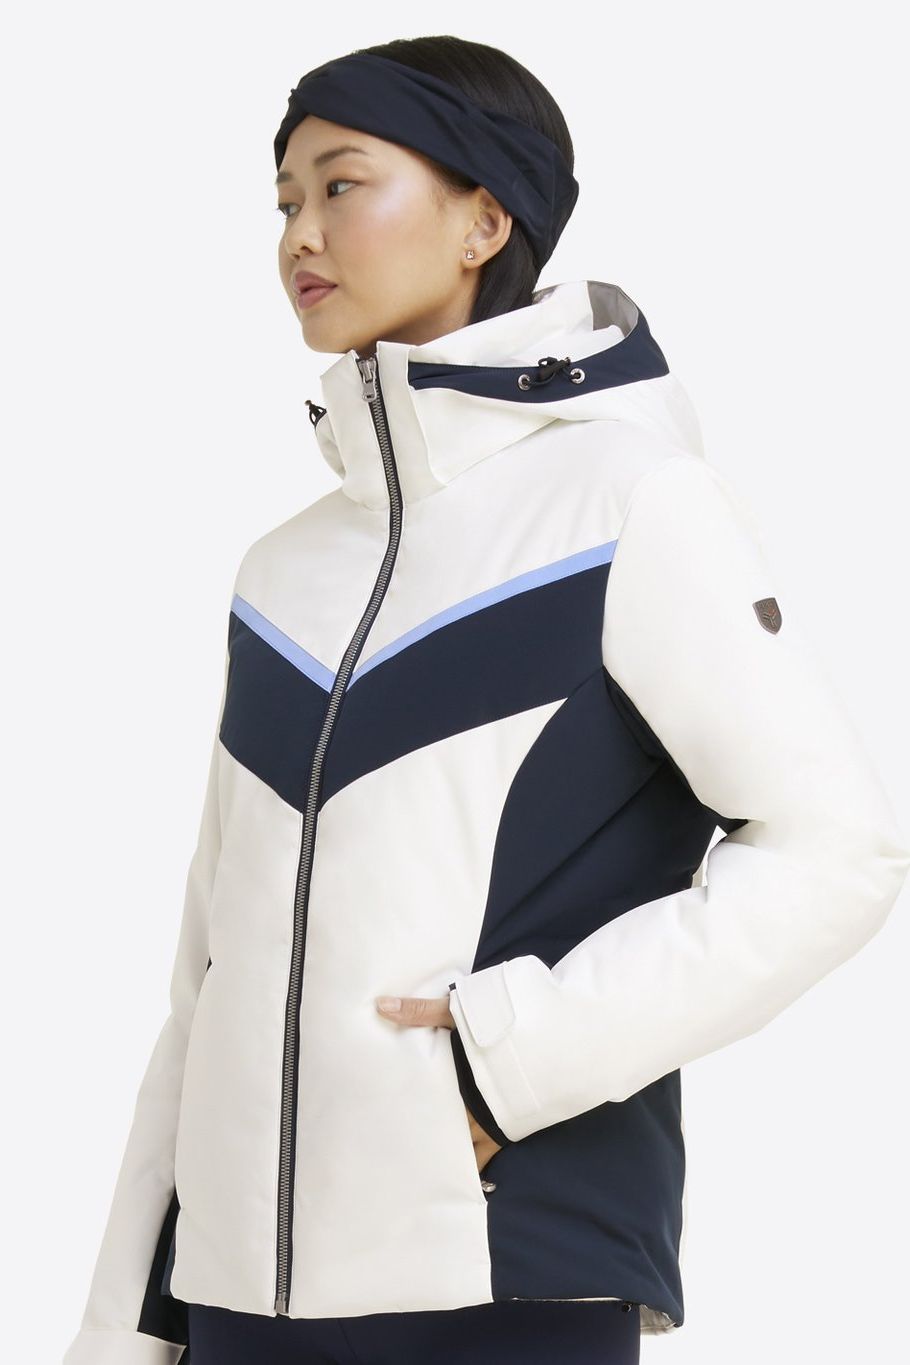 Draper James and Fera Launched The Ski Gear You'll Want to Hit the ...